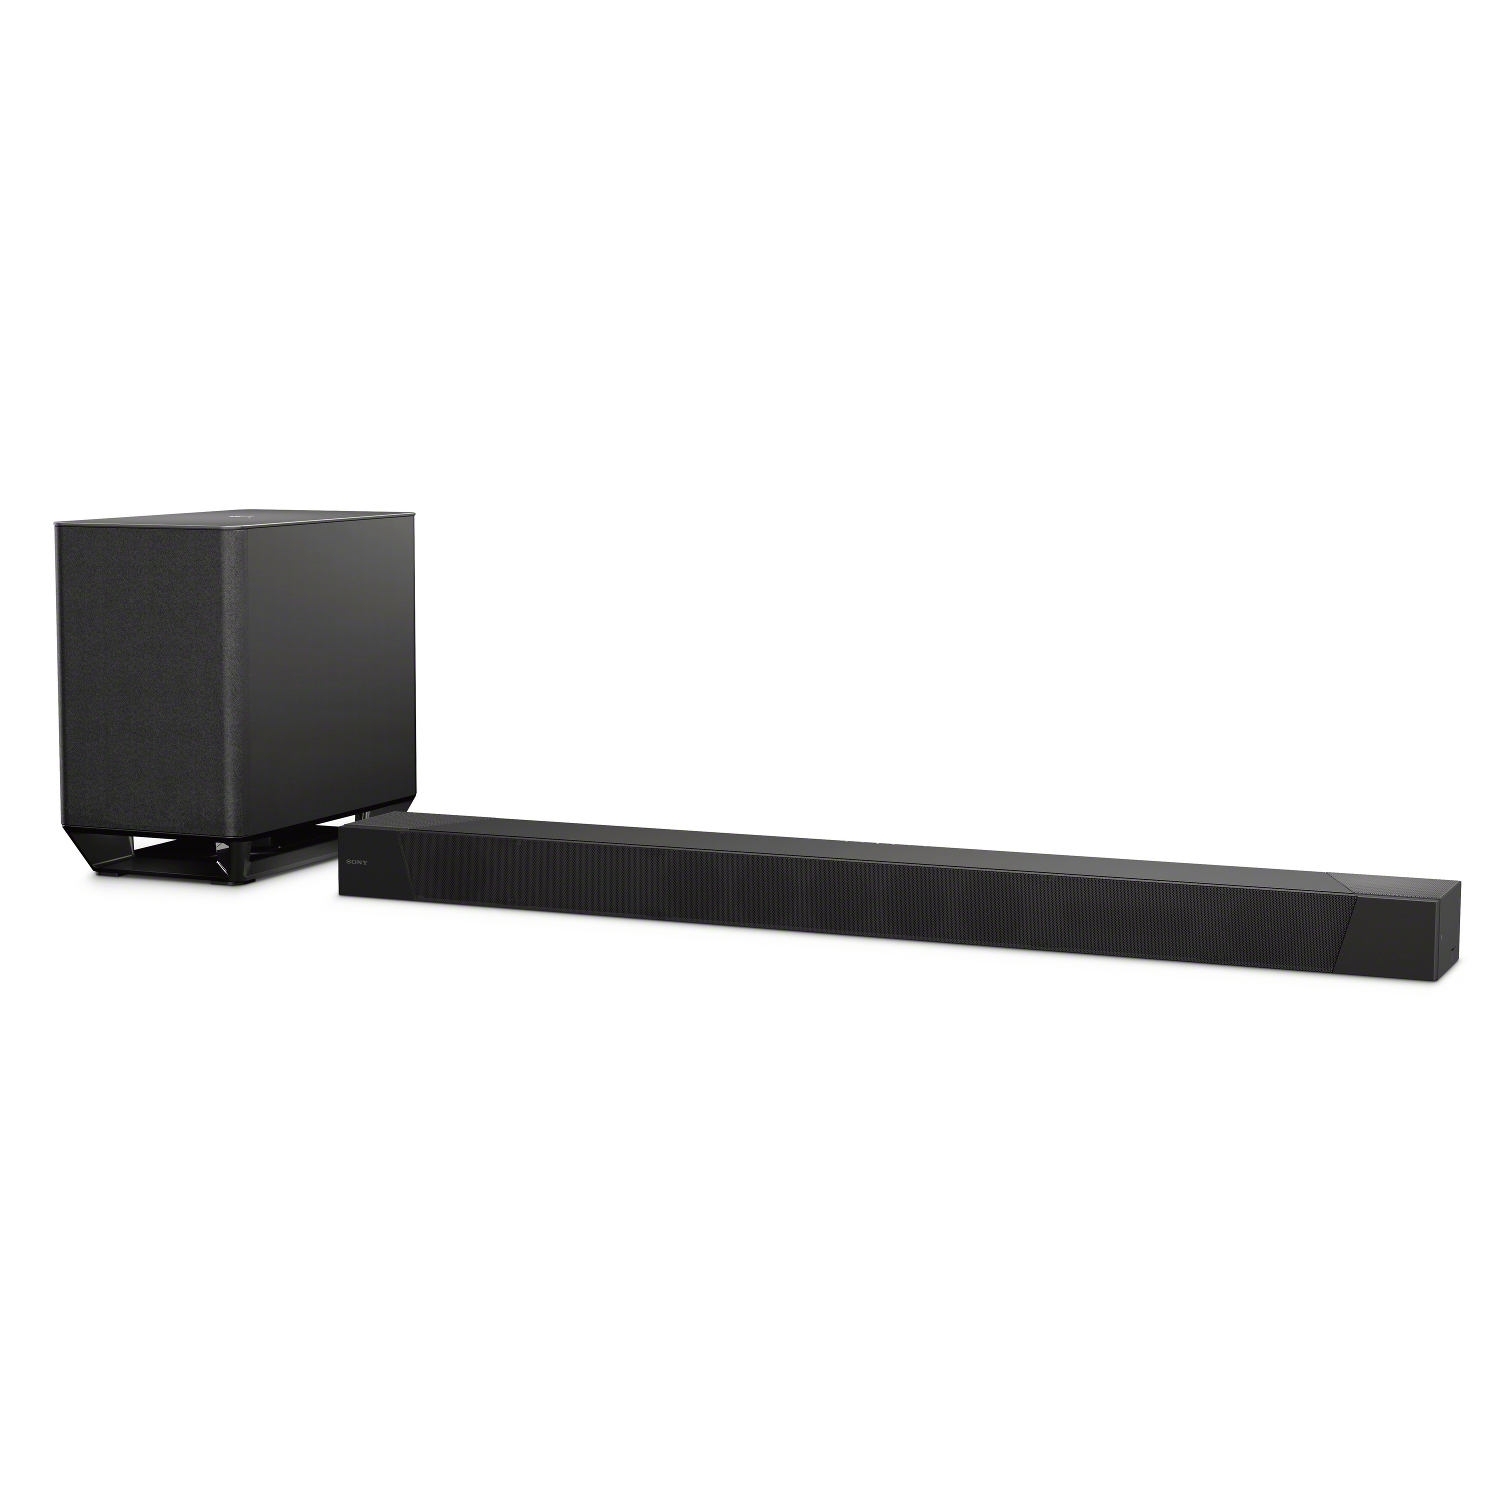 soundbar with dolby vision passthrough